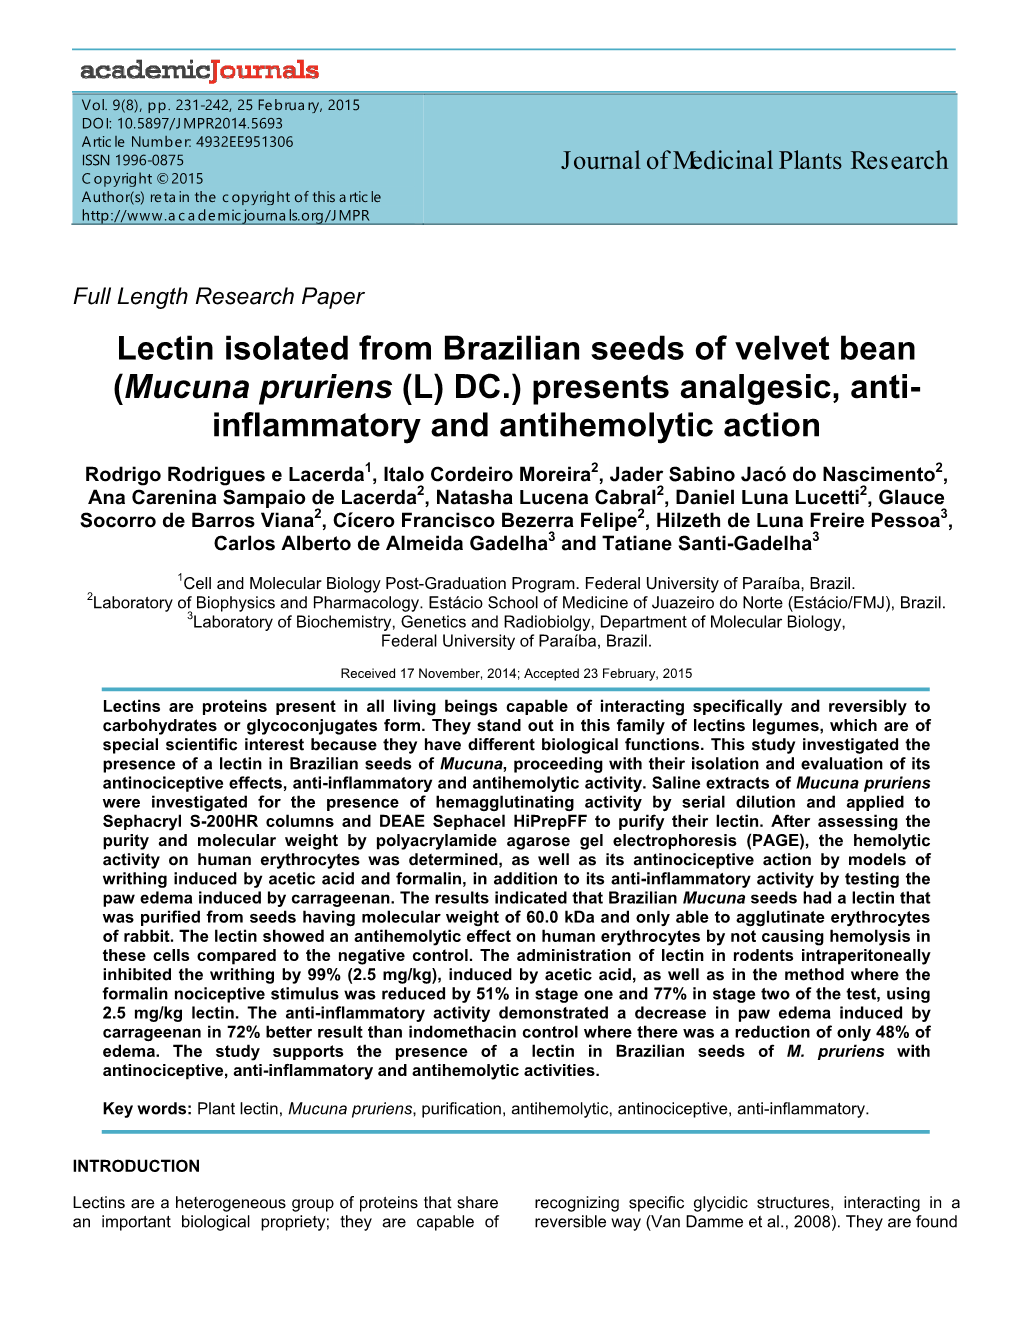 Lectin Isolated from Brazilian Seeds of Velvet Bean (Mucuna Pruriens (L) DC.) Presents Analgesic, Anti- Inflammatory and Antihemolytic Action